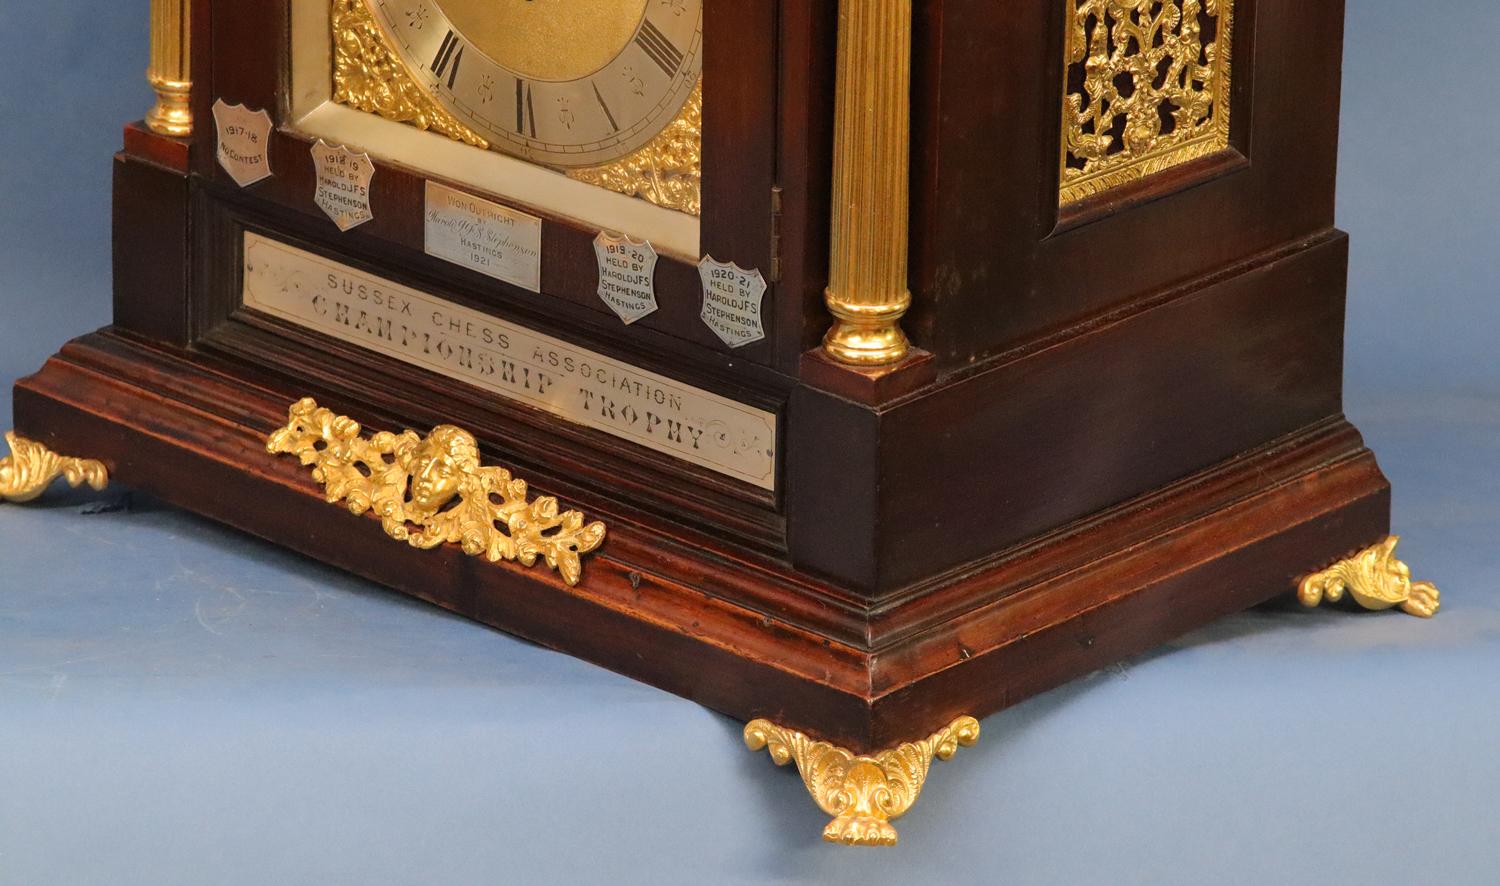 Edwardian Rare Late-19th century English Chess Trophy Bracket Clock. For Sale